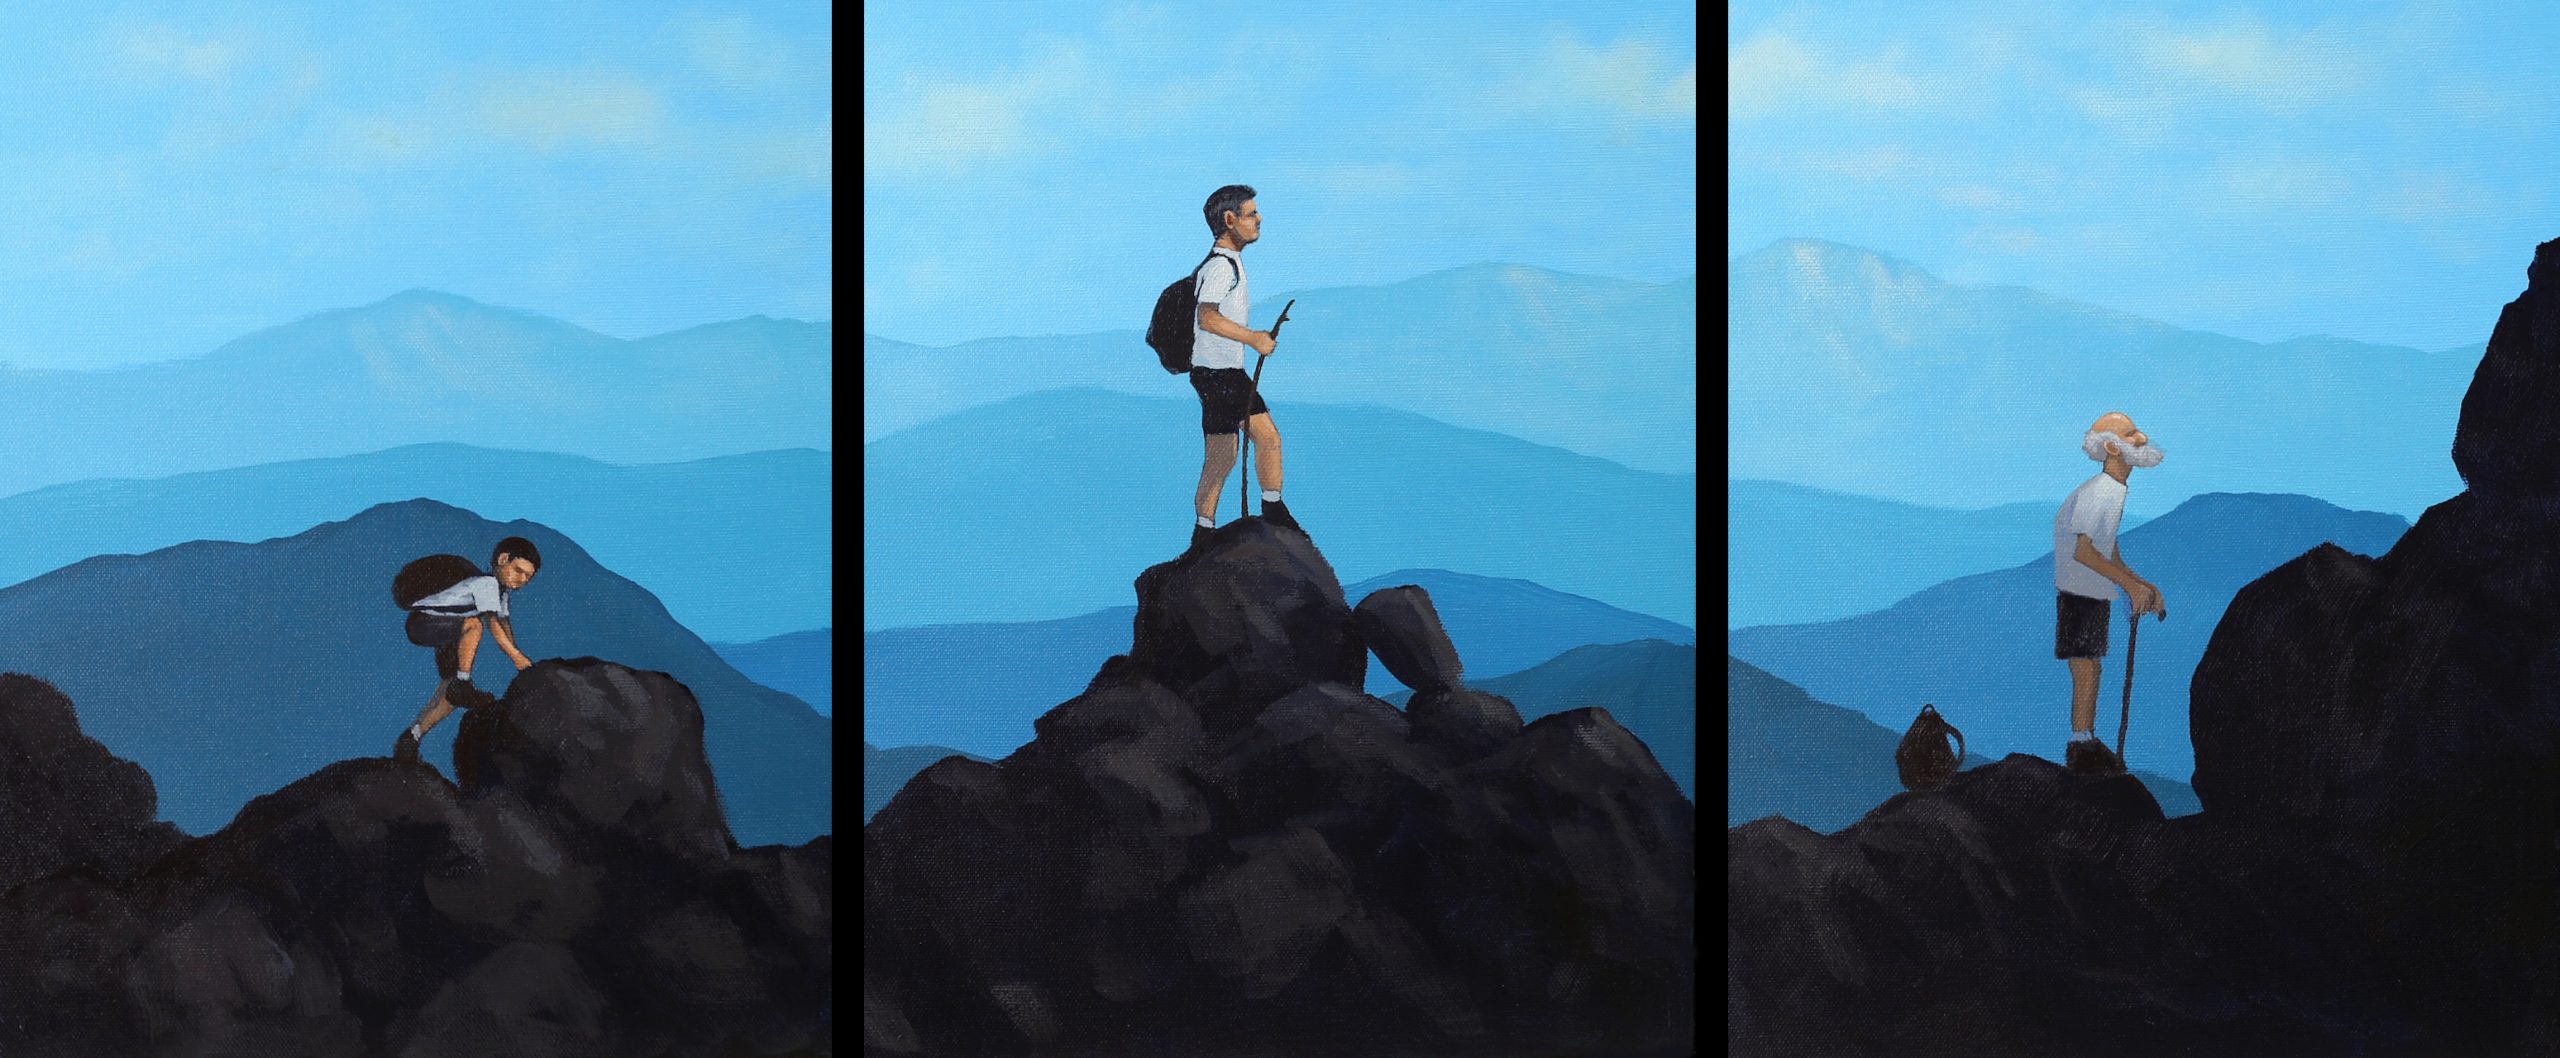 You’ll Never Stop Climbing – An Acrylic Painting Lesson